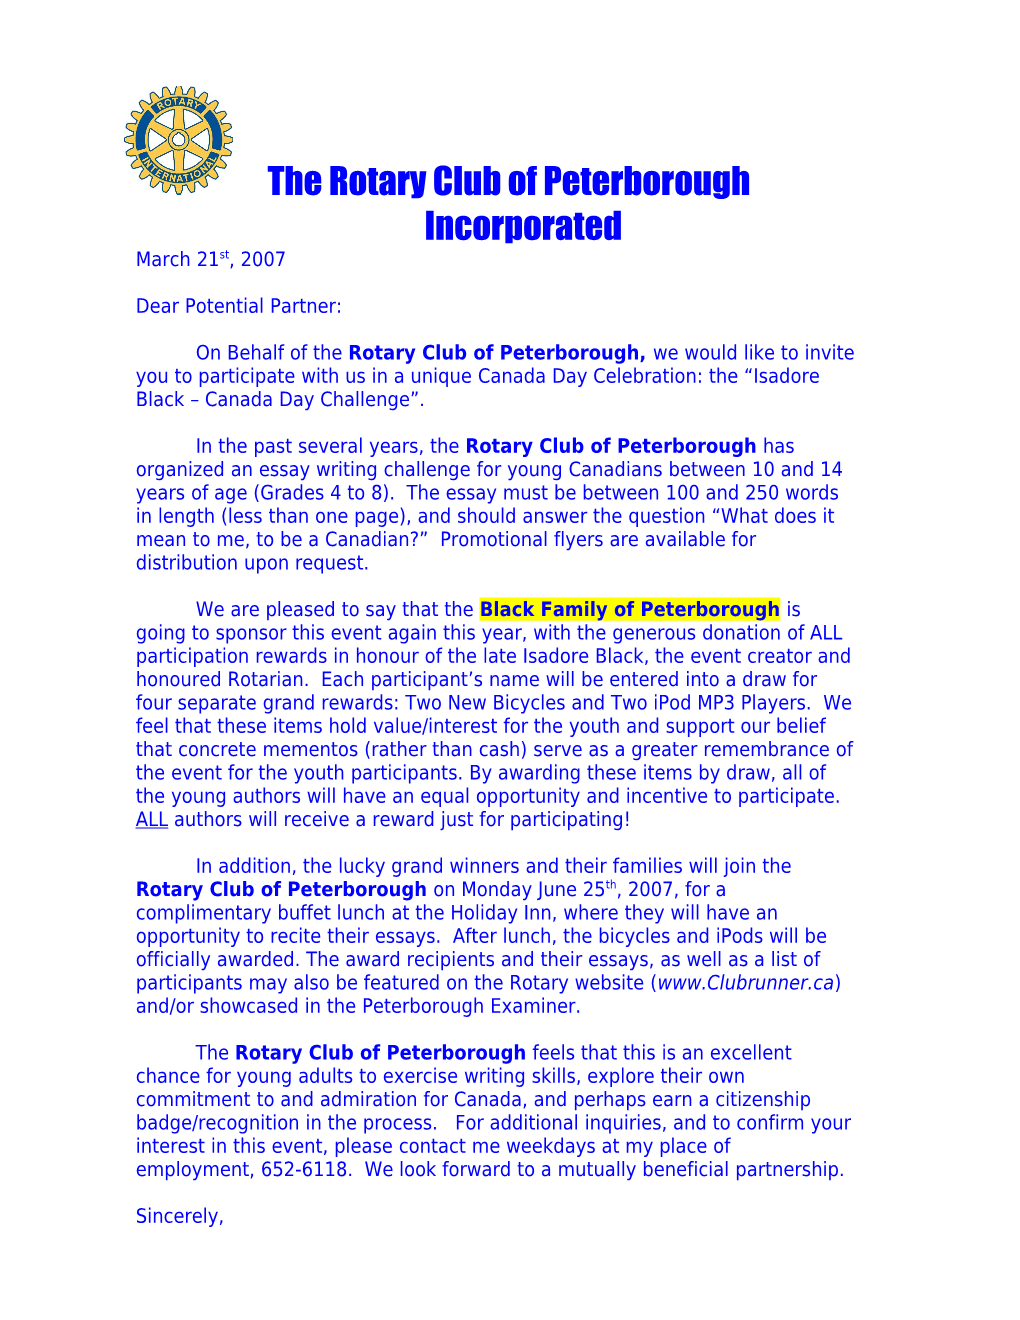 The Rotary Club of Peterborough Incorporated